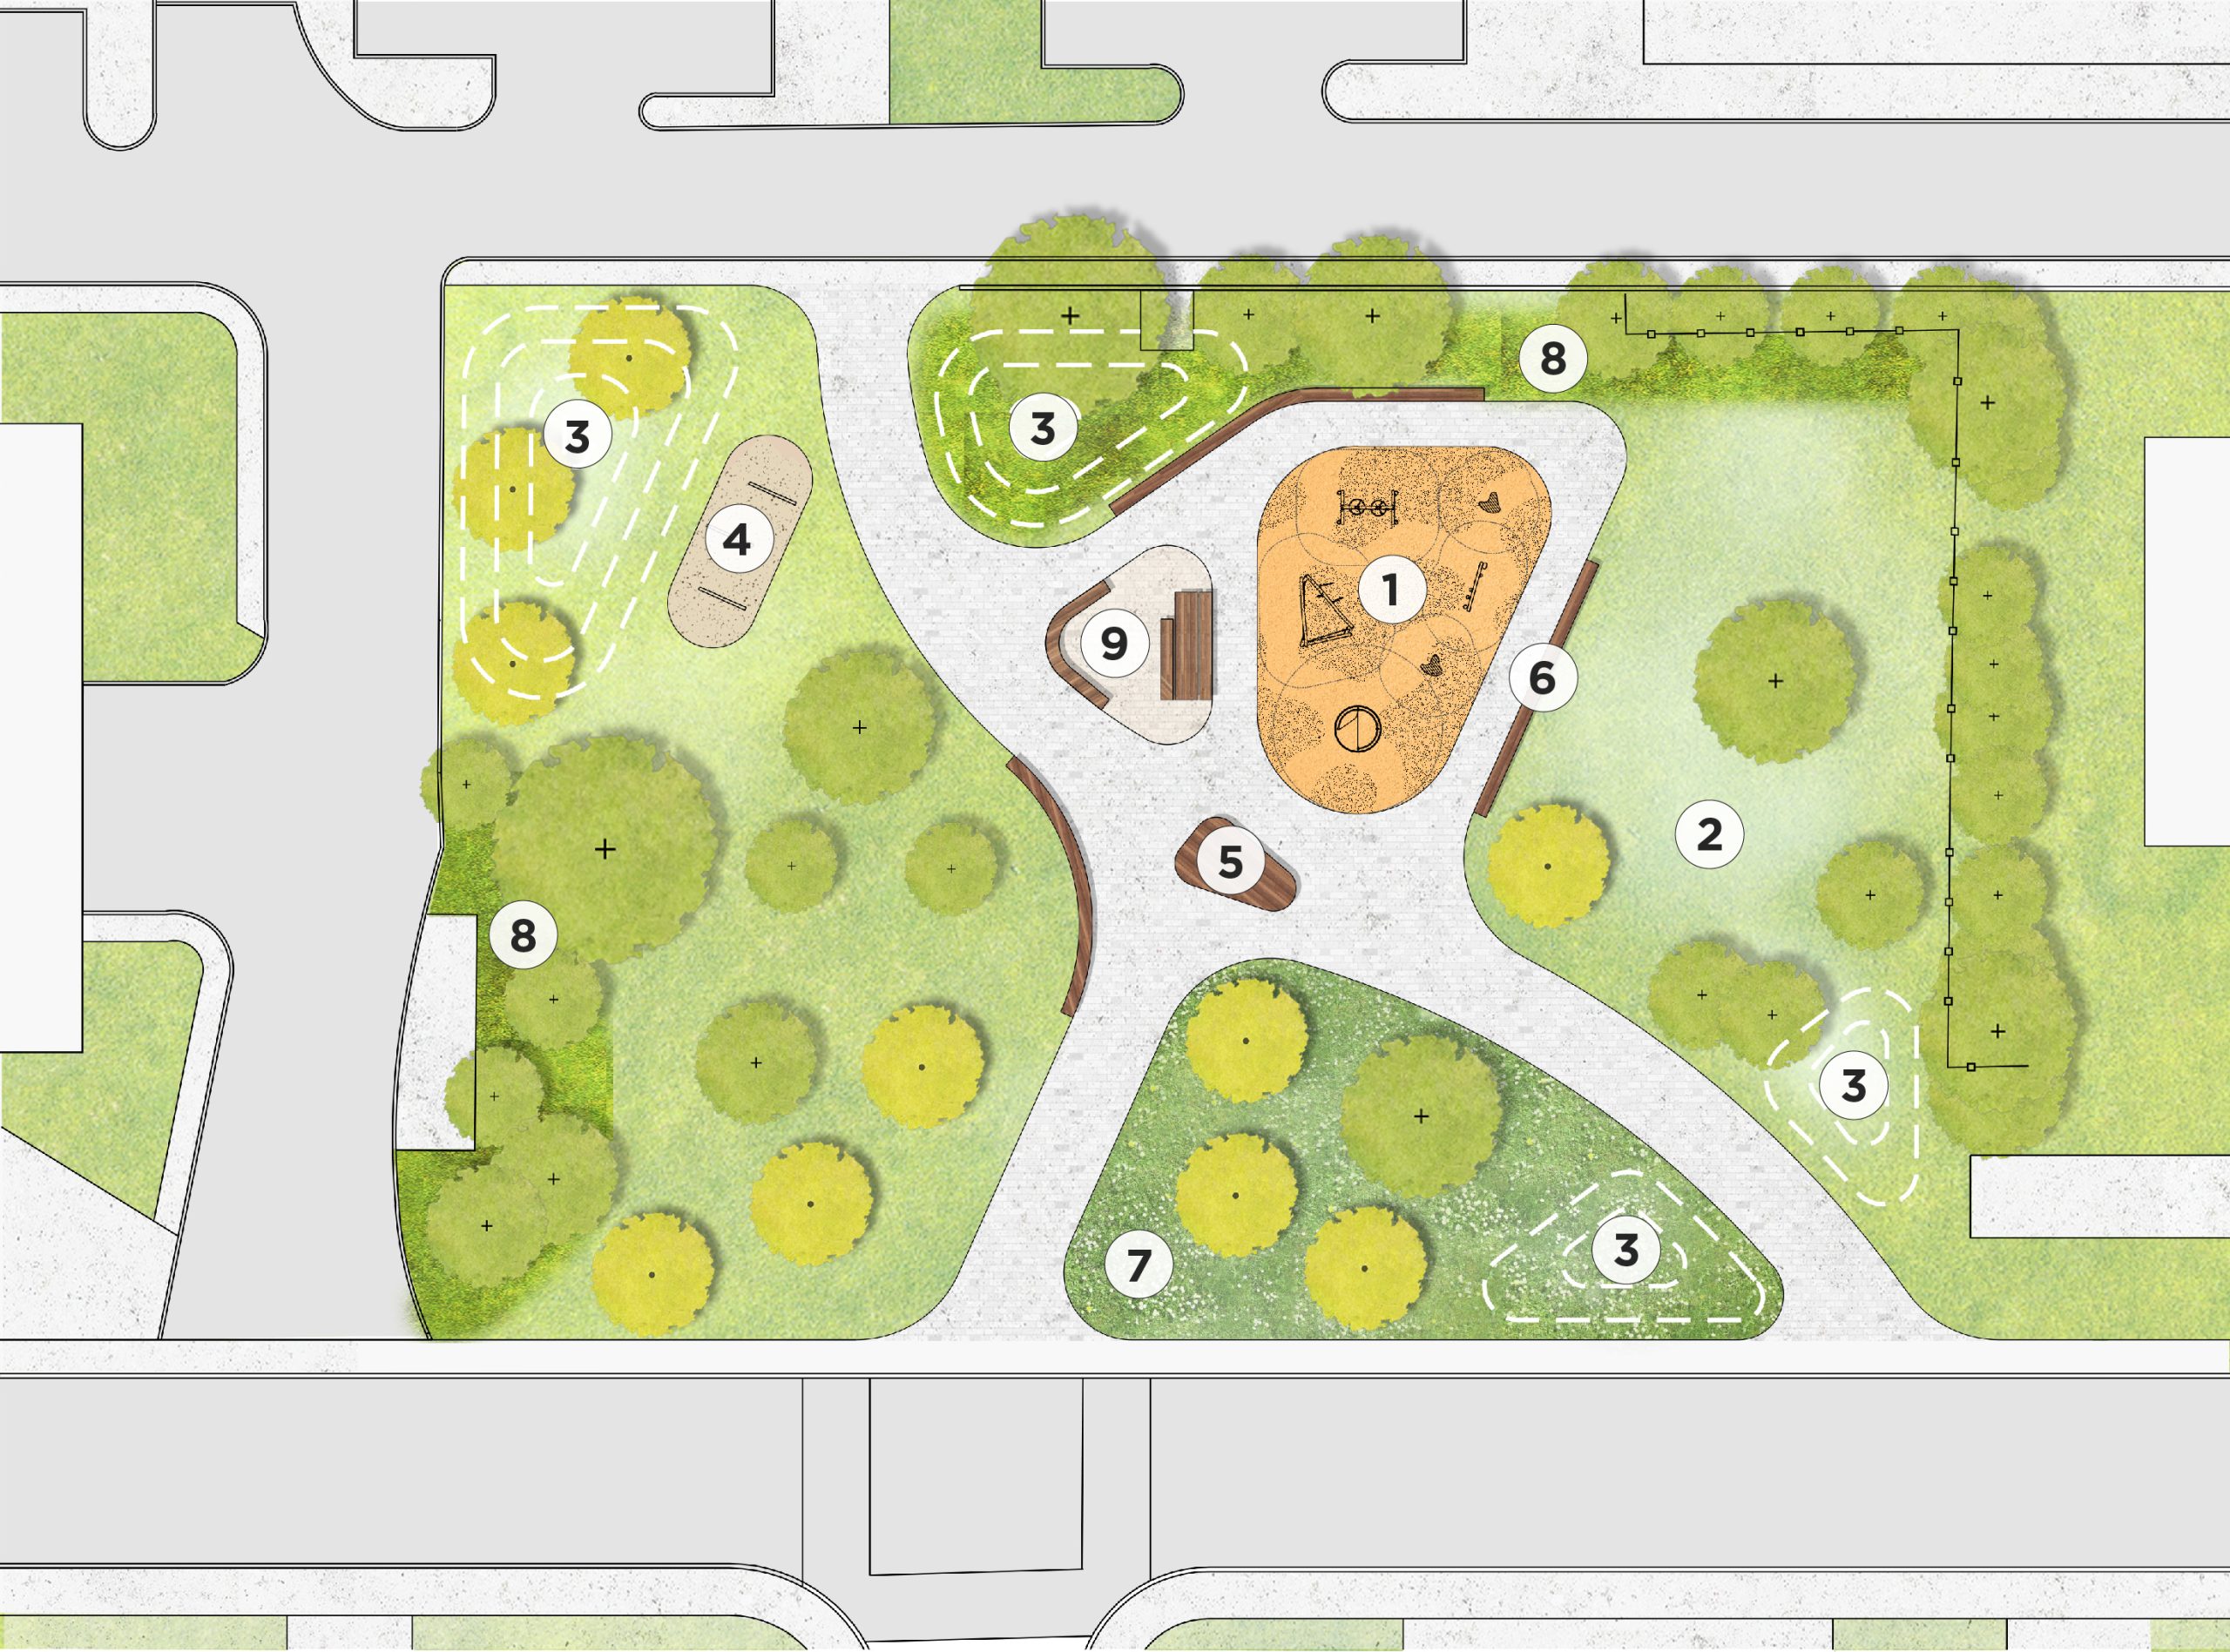 Aerial view of the design option for the parkette, with the main park entrance from Erskine Avenue where multiple defined pathways lead to activity areas. From the bottom left corner to top right corner, there is a meadow and landforms, shrubs and grasses, platform seating at the centre with a picnic area and playground at the centre, and fitness equipment to the west.